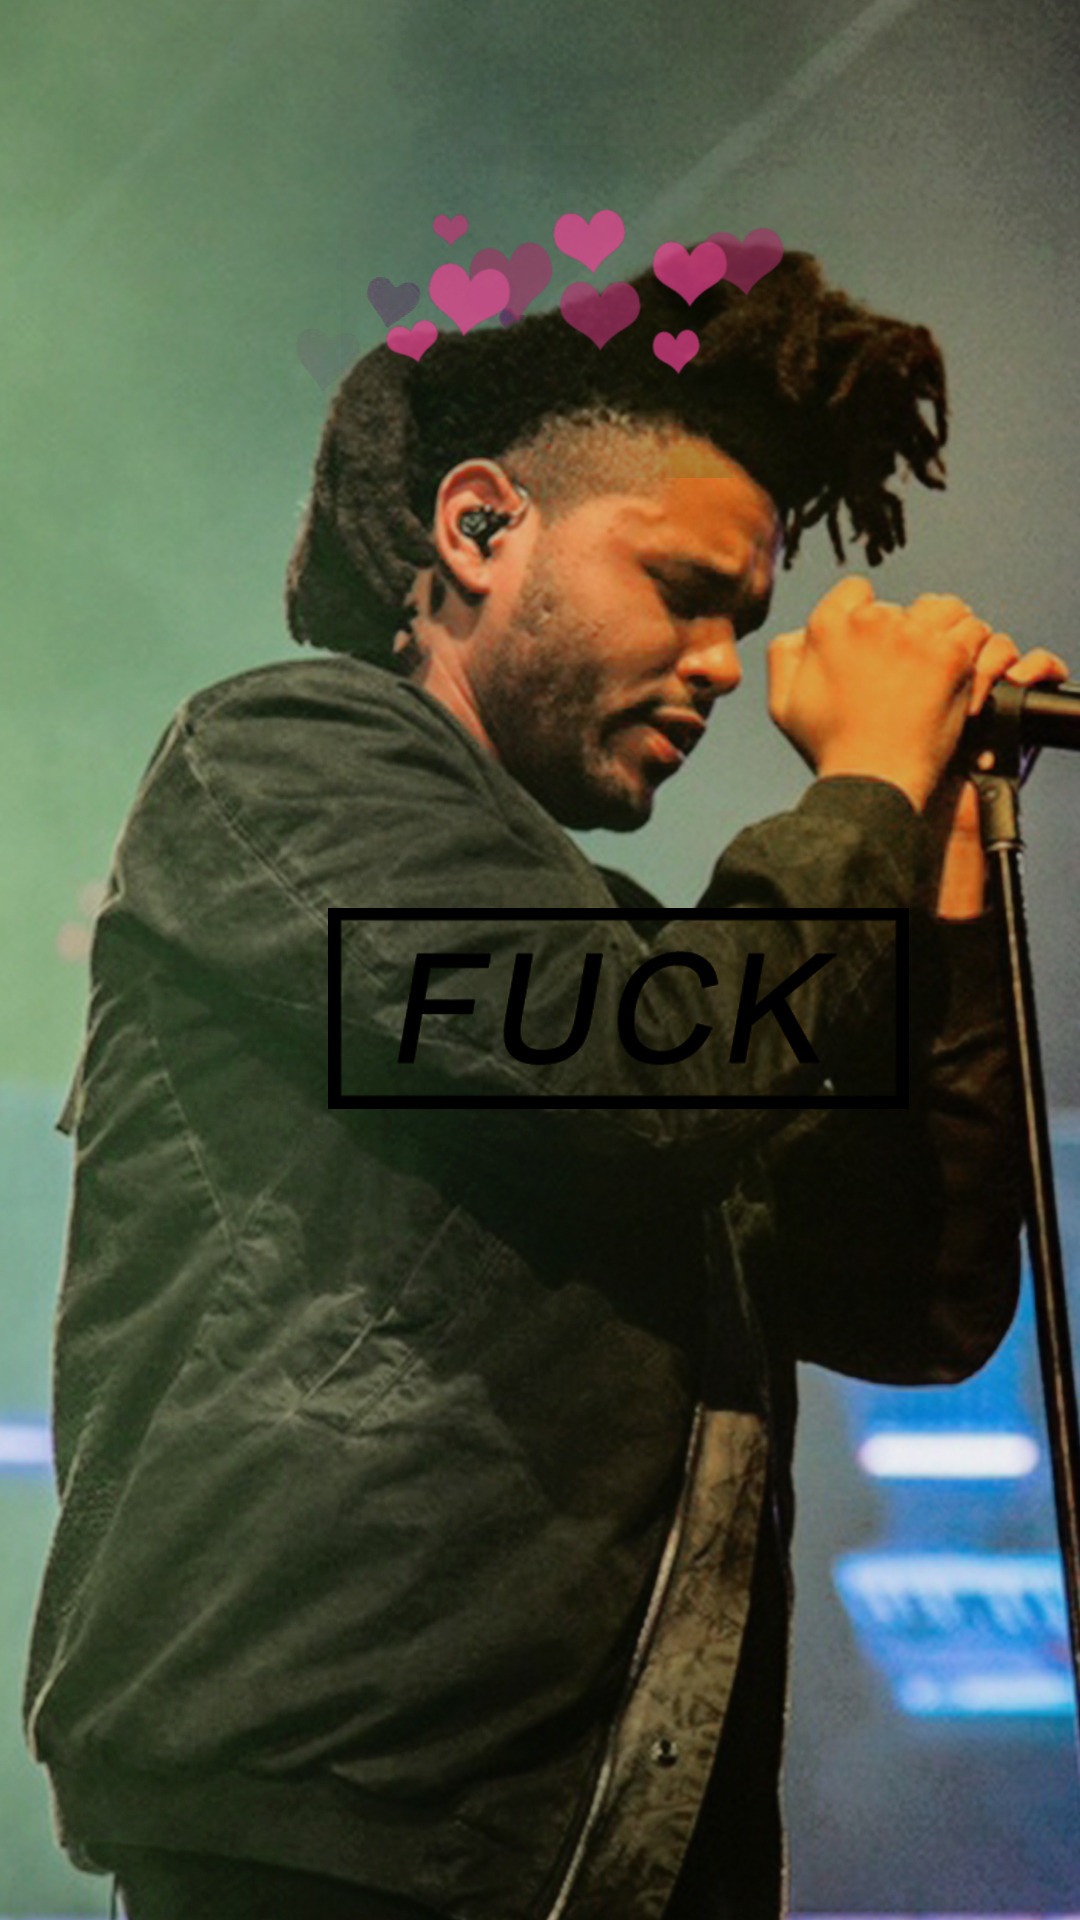 1080x1920 the weeknd the weeknd lockscreen the weeknd lockscreens the weeknd  background the weeknd backgrounds the weeknd